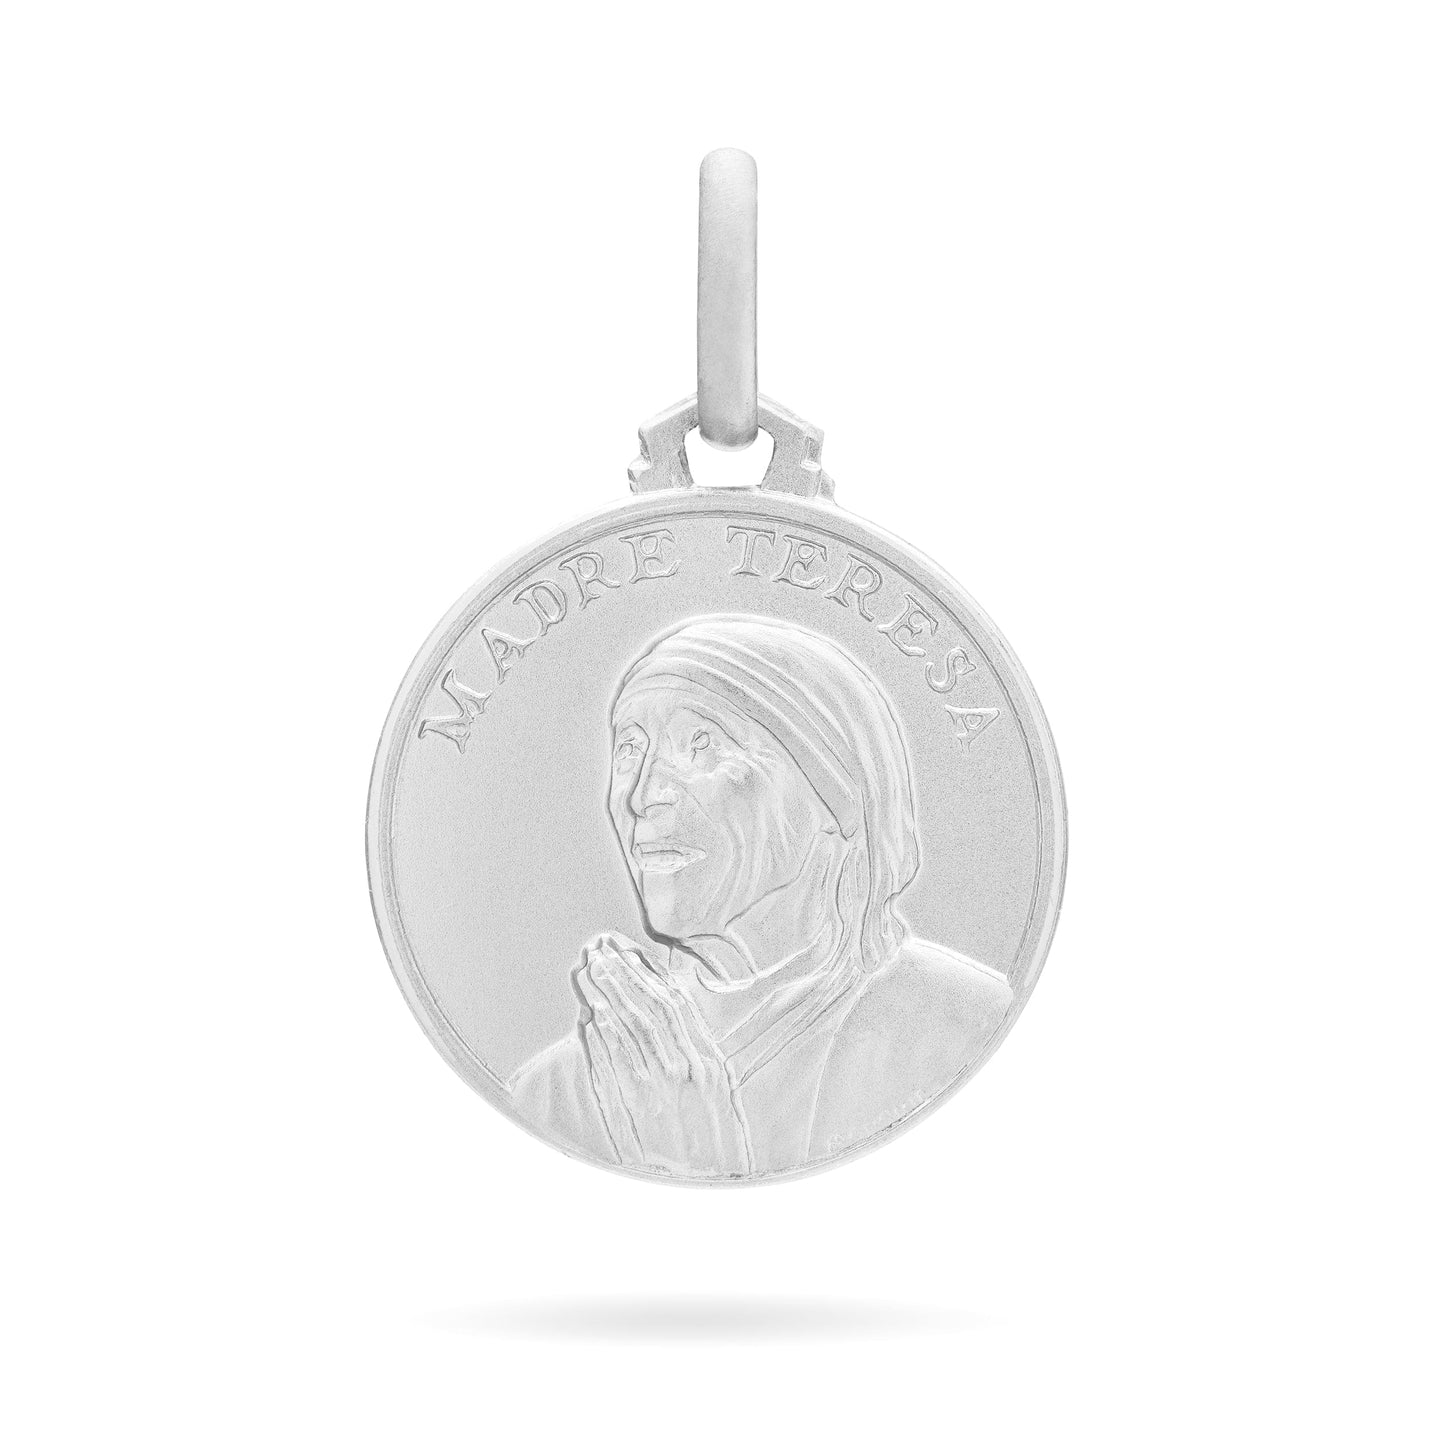 MONDO CATTOLICO Medal 14 mm (0.55 in) Silver medal of Saint Teresa of Calcutta